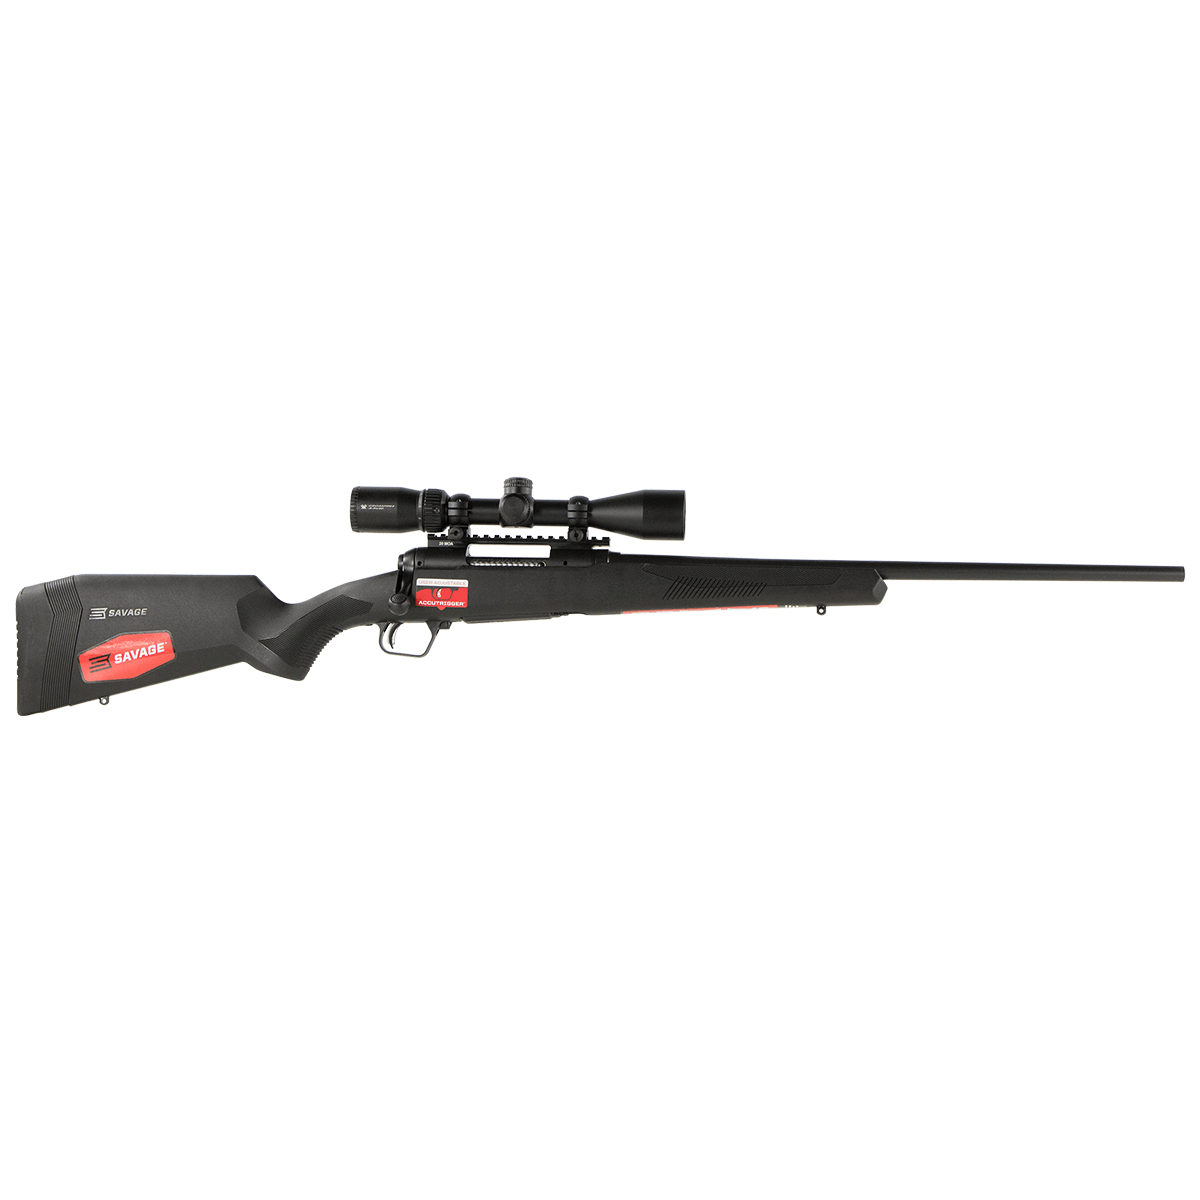 Savage Arms 57301 110 Apex Hunter XP 204 Ruger Hunting Rifle-011356573018